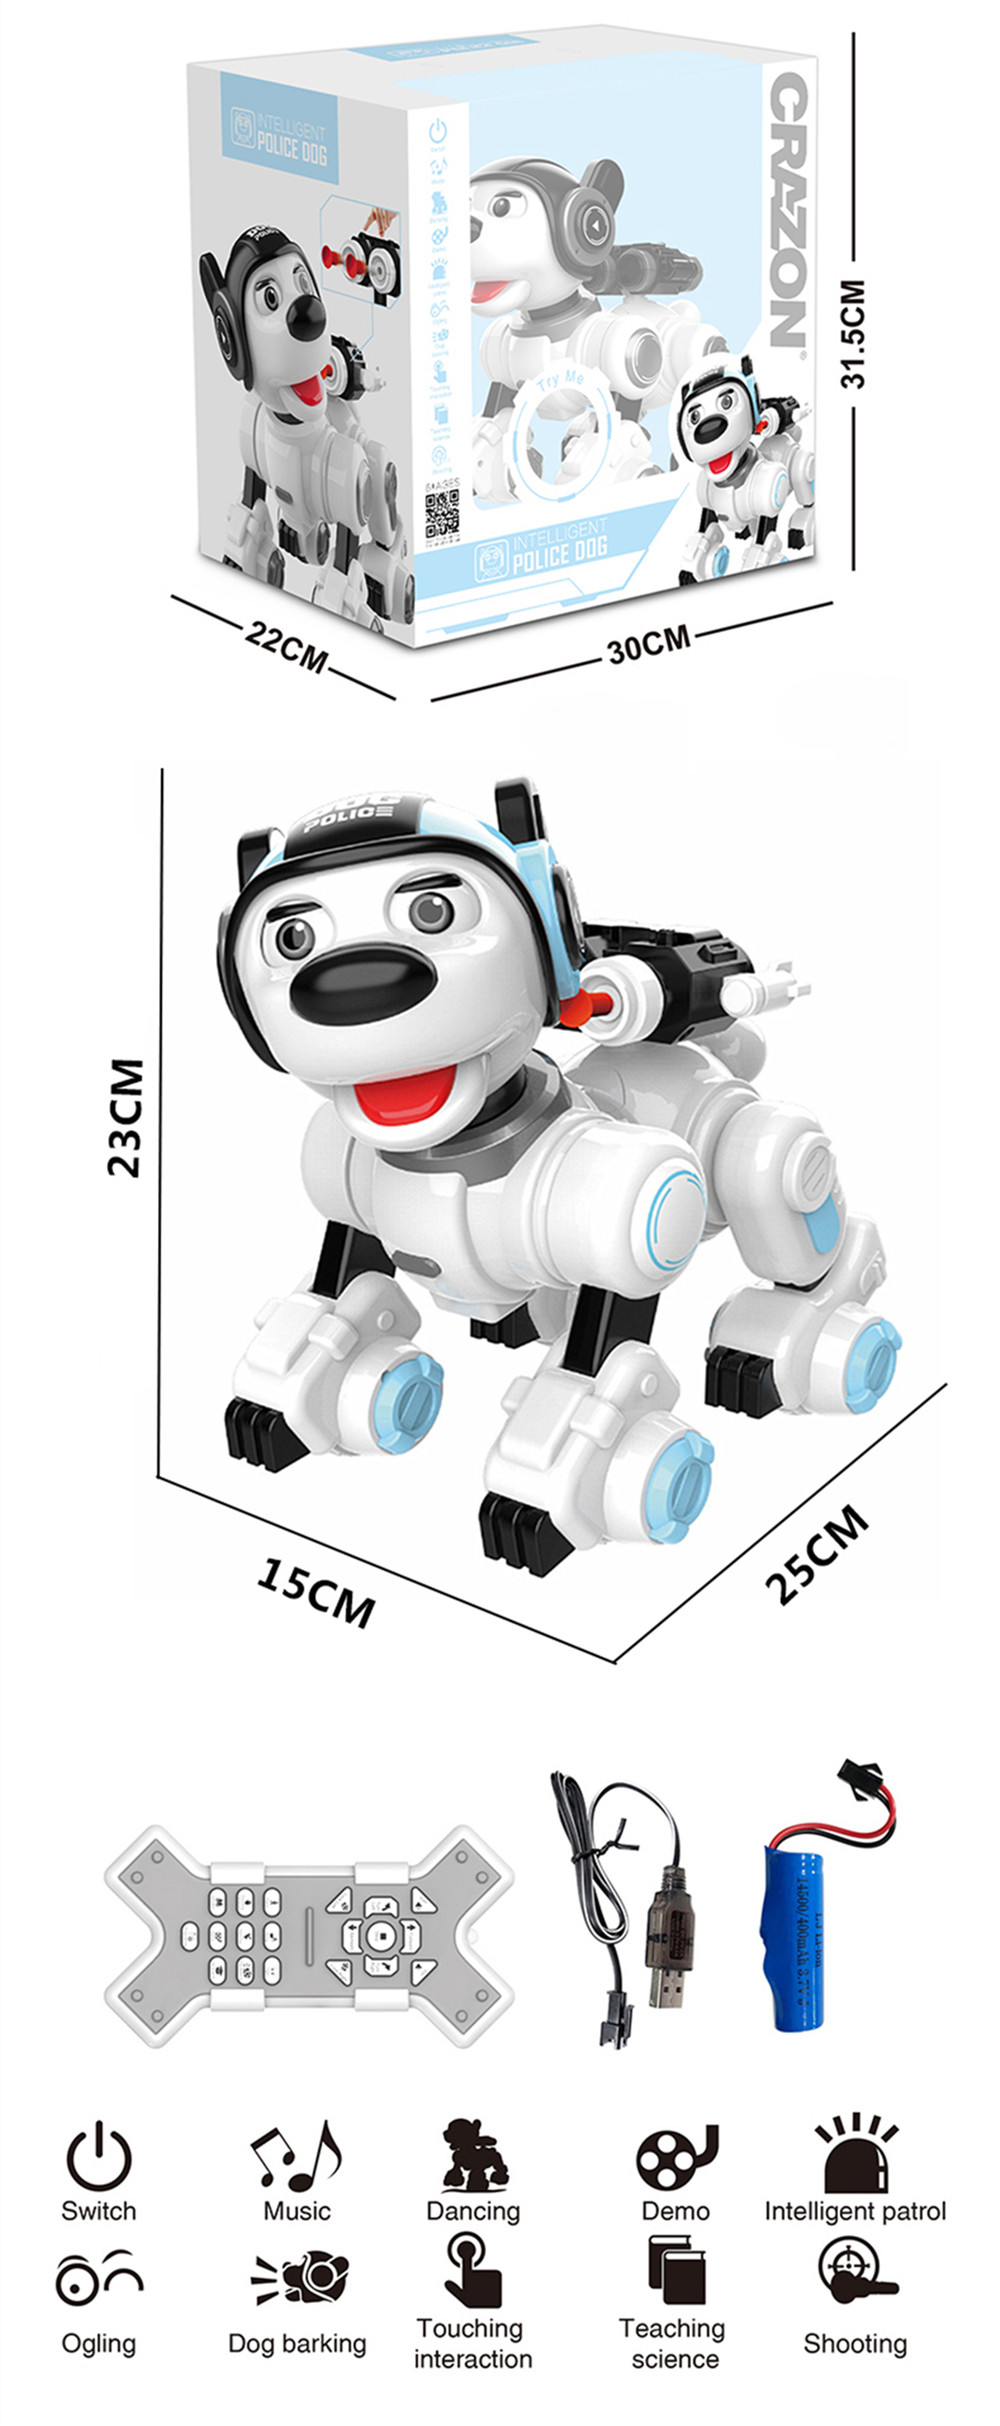 Mofun-1901-Smart-Dog-Programmable-InfraredTouch-Control-Patrol-Dance-Sing-Shooting-RC-Robot-Toy-Gift-1574901-4